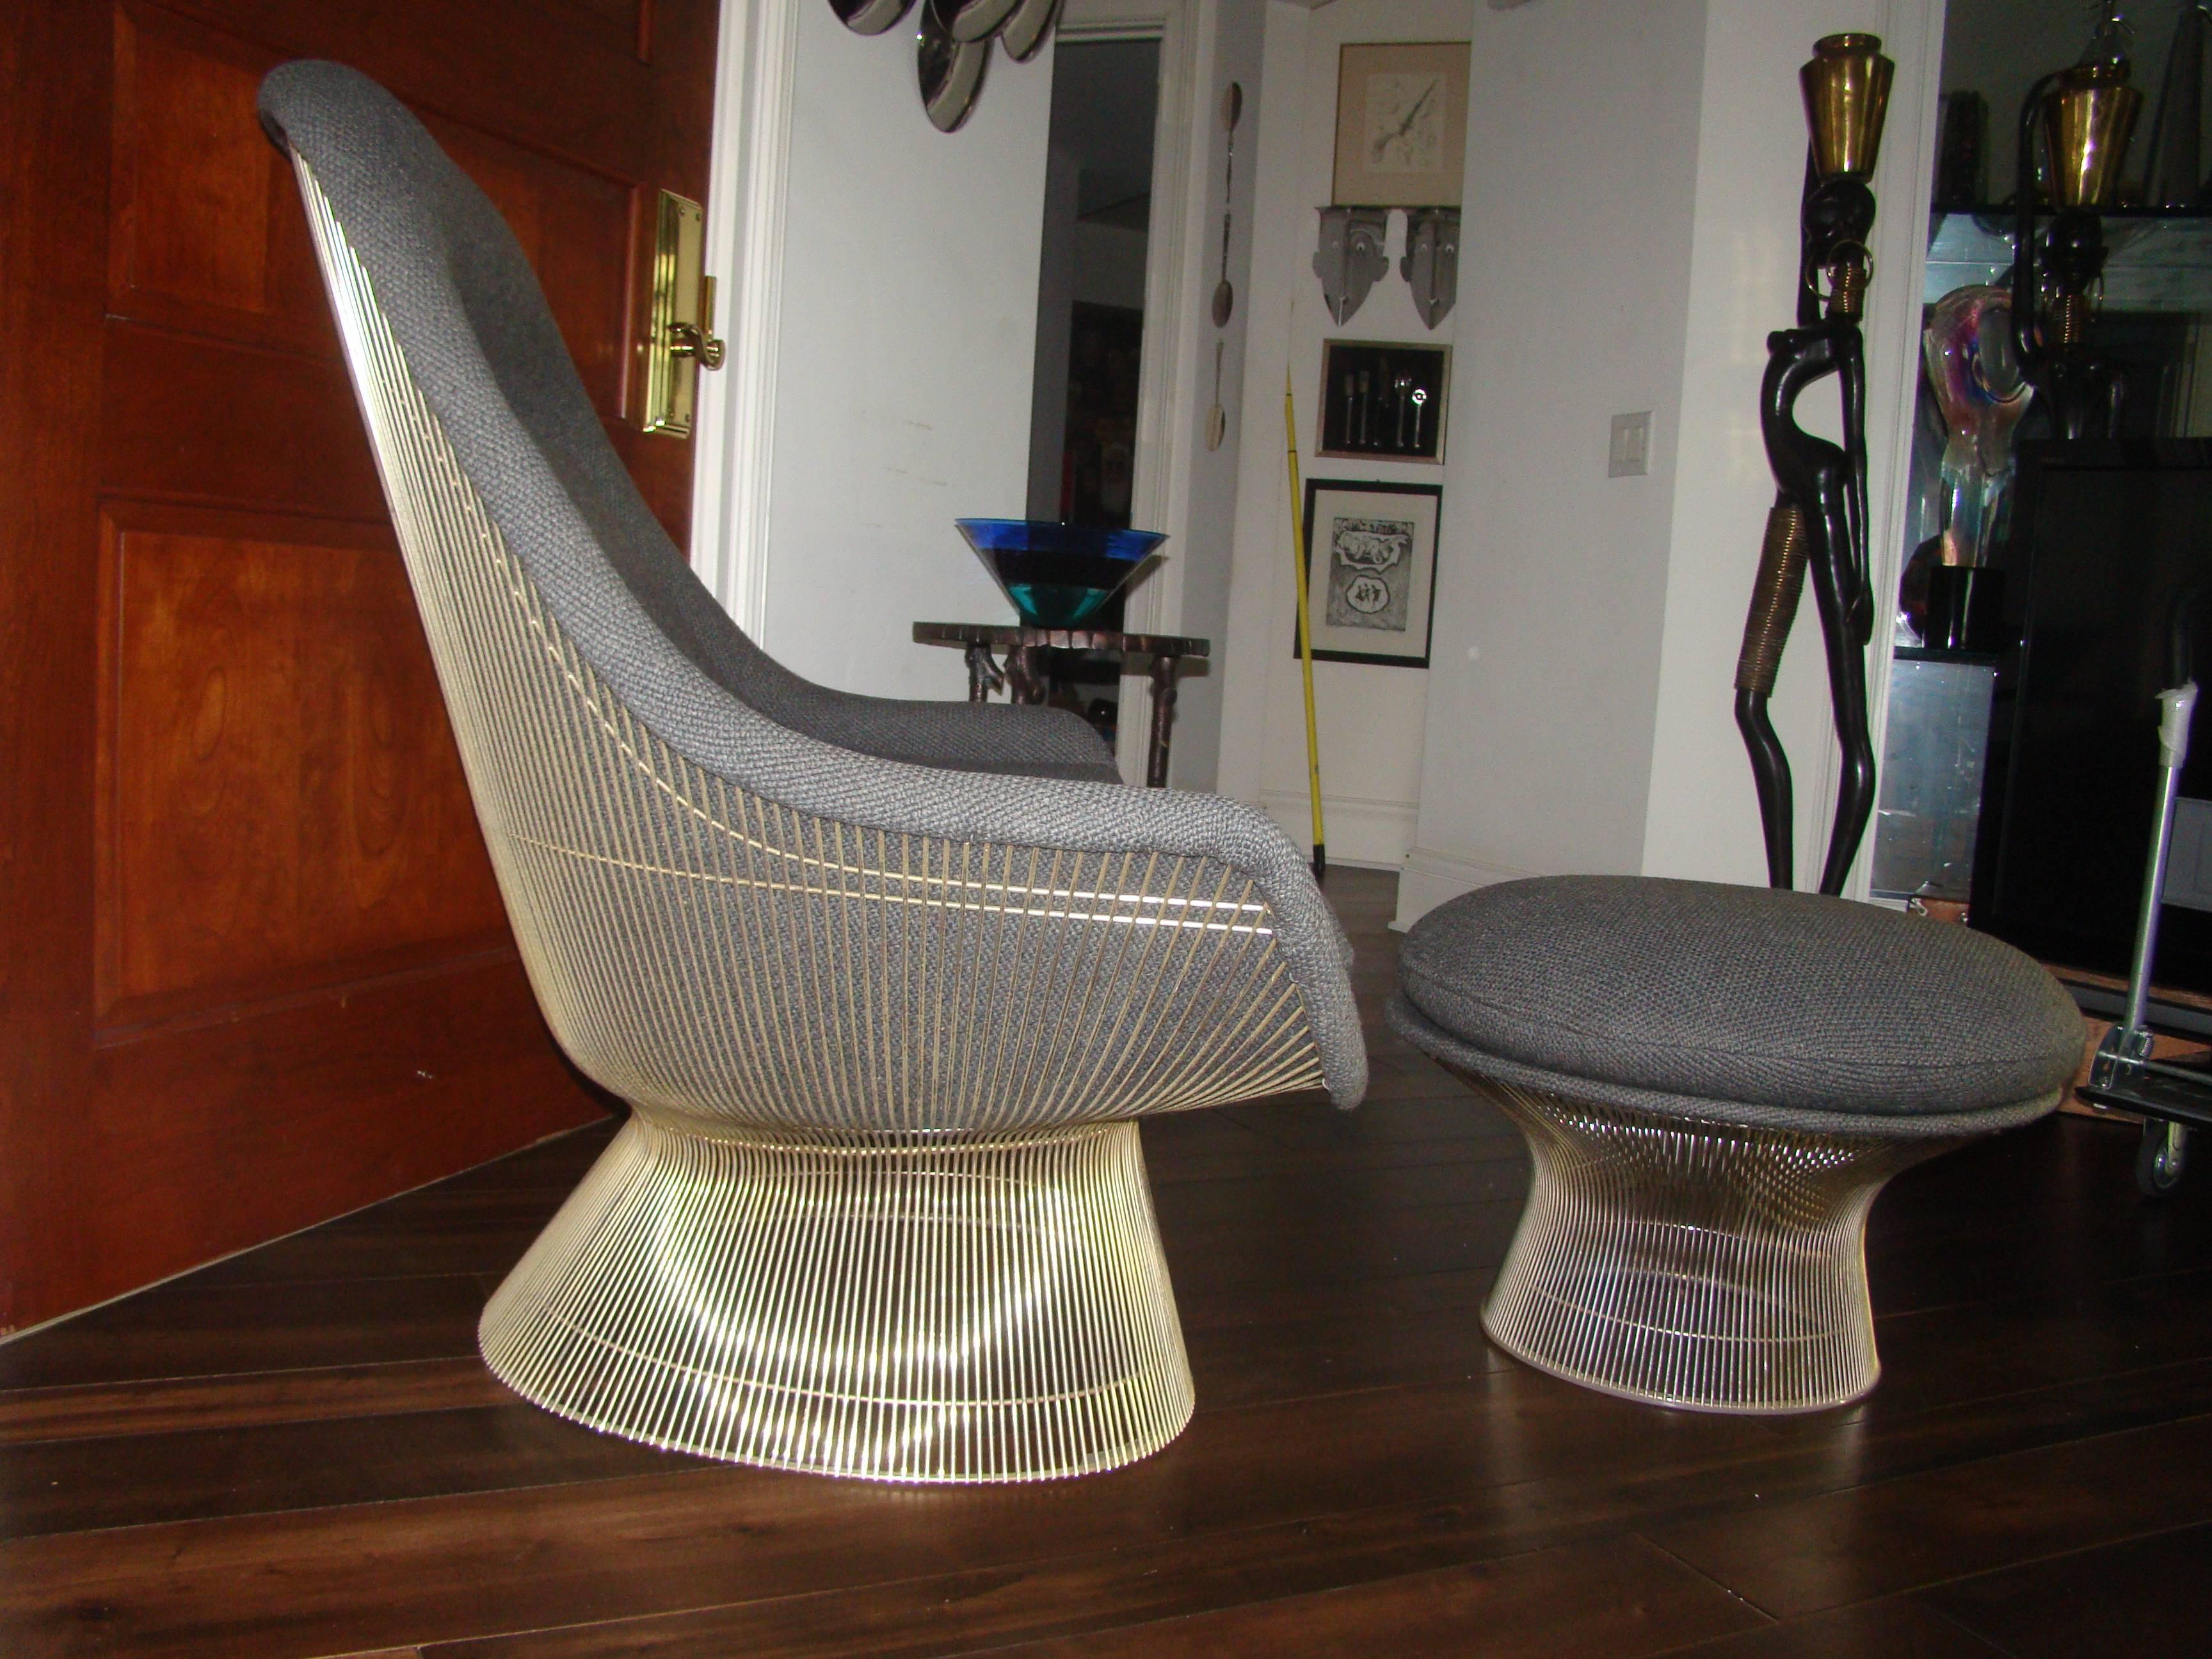 Exceptional easy lounge chair and ottoman designed by Warren Platner for Knoll International. This beautiful matching set comes from the original owner and is comprised of the classic chrome sculptural wire frame with thick nubby gray knoll fabric.